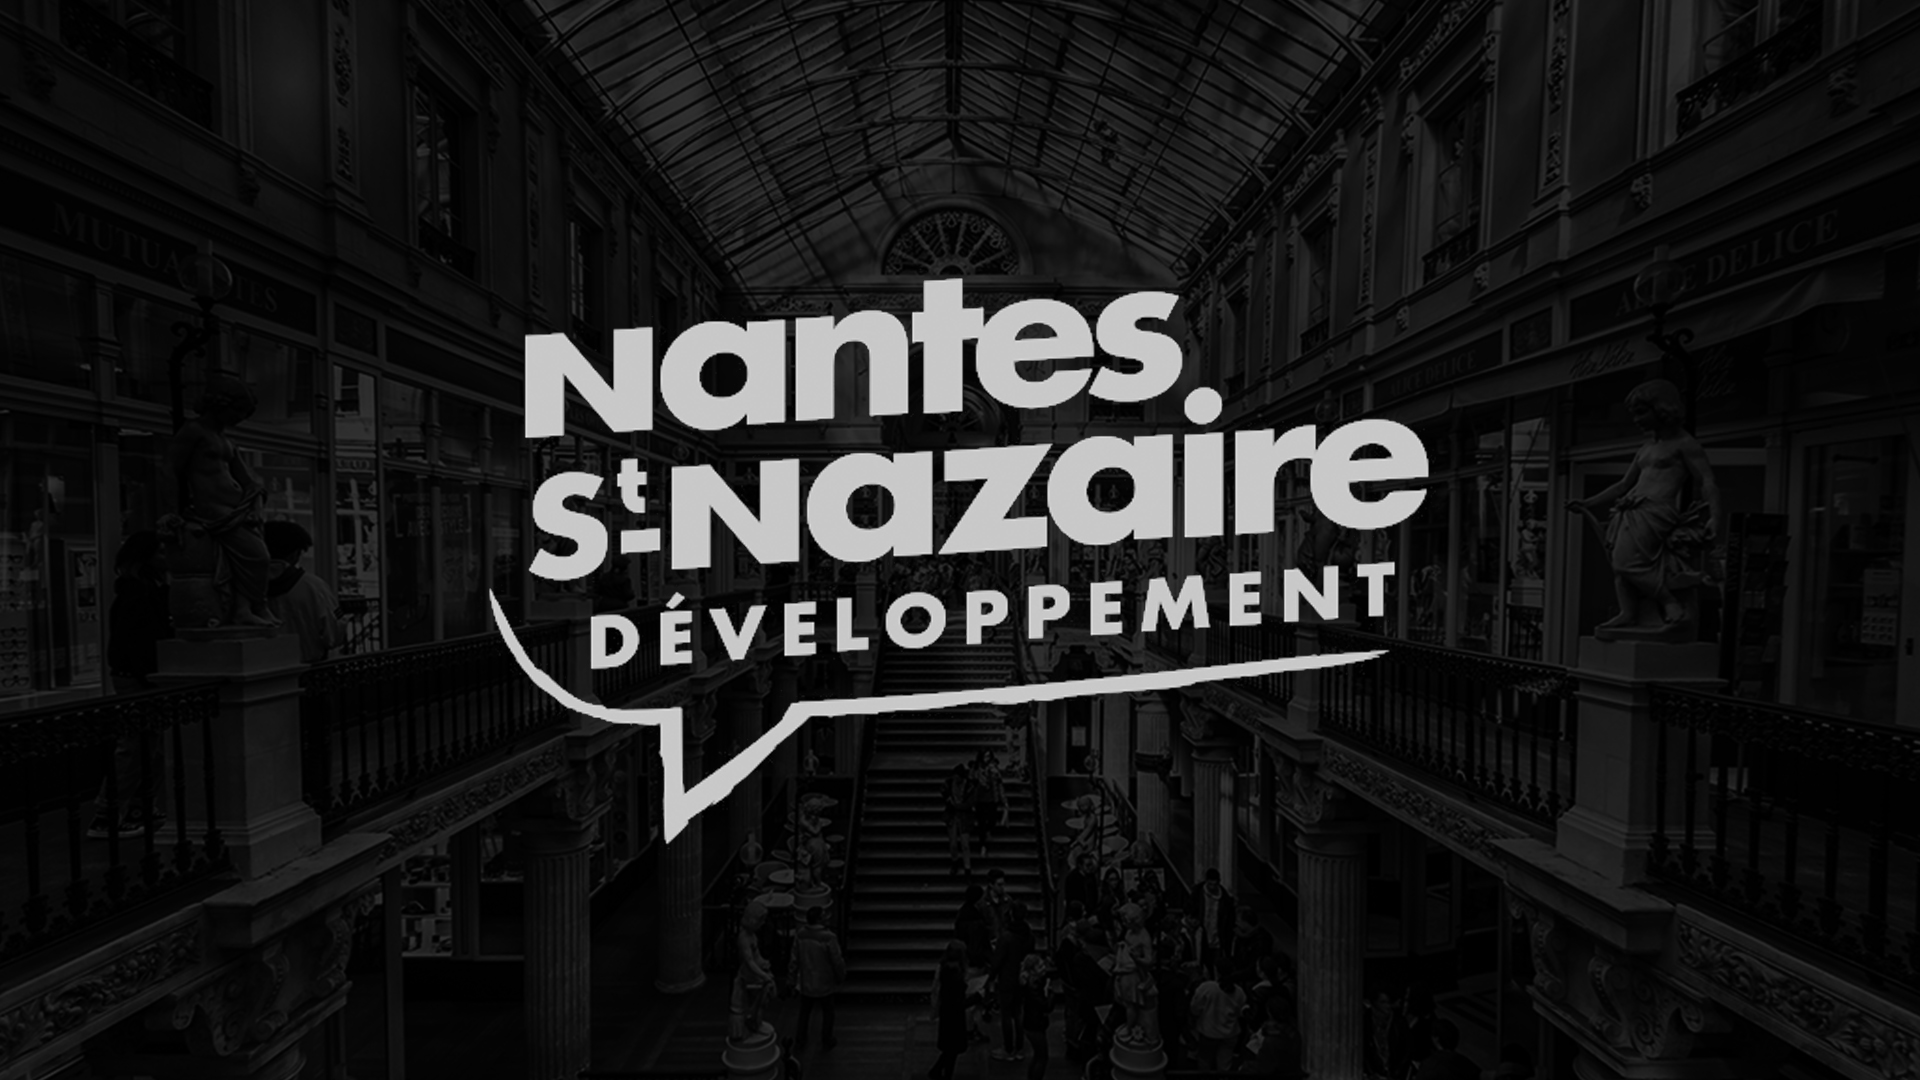 17MARS: A NEW BRAND DESIGN AGENCY IN THE NANTES ECOSYSTEM